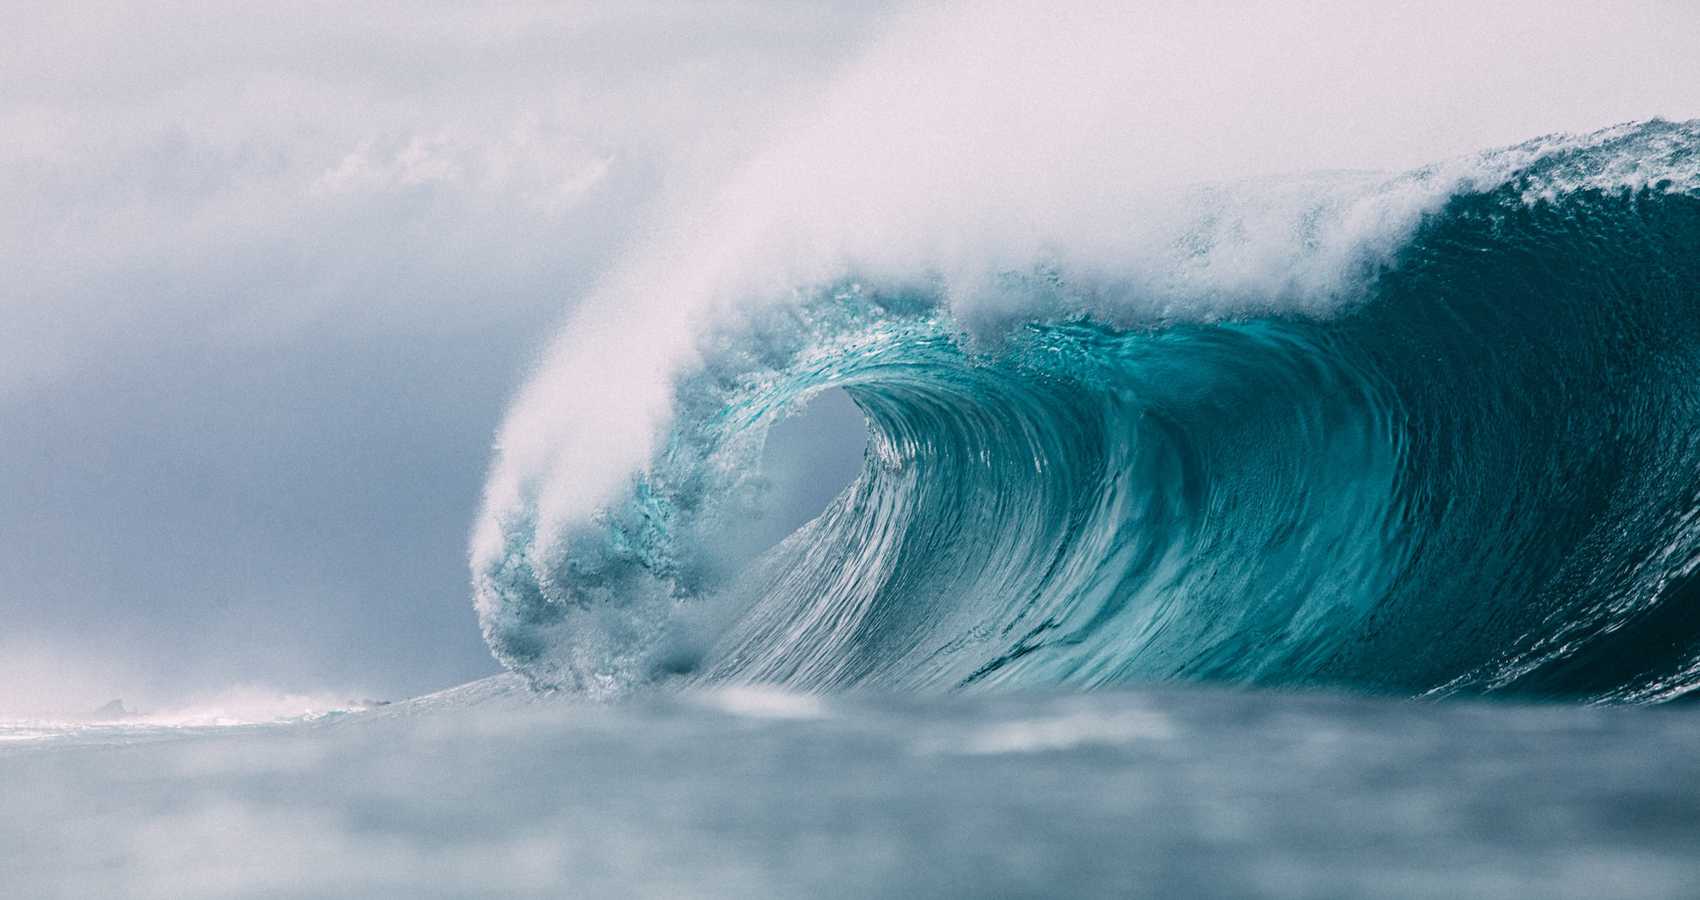 The Wave, a poem by Tamar Gvelesiani at Spillwords.com